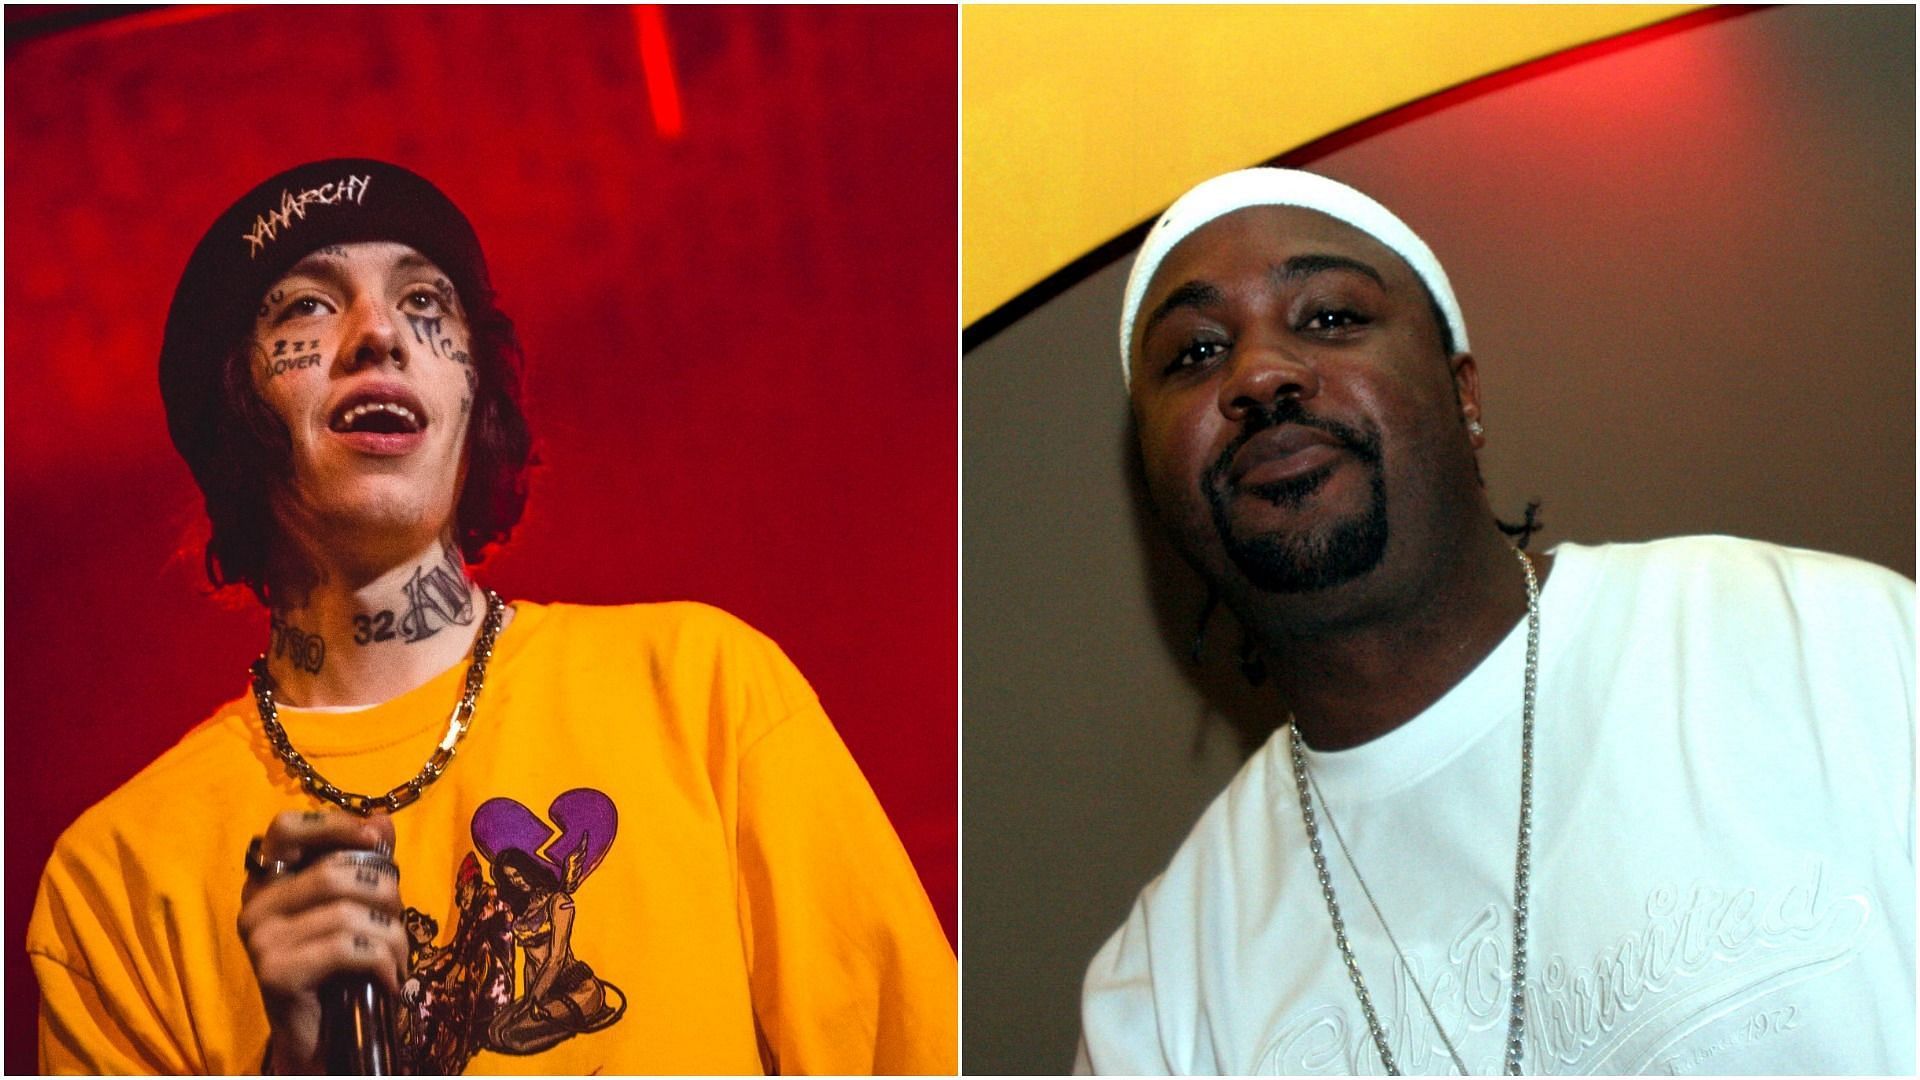 Lil Xan recently made some allegations against Stat Quo (Images via Getty Images/Gina Wetzler and Johnny Nunez)